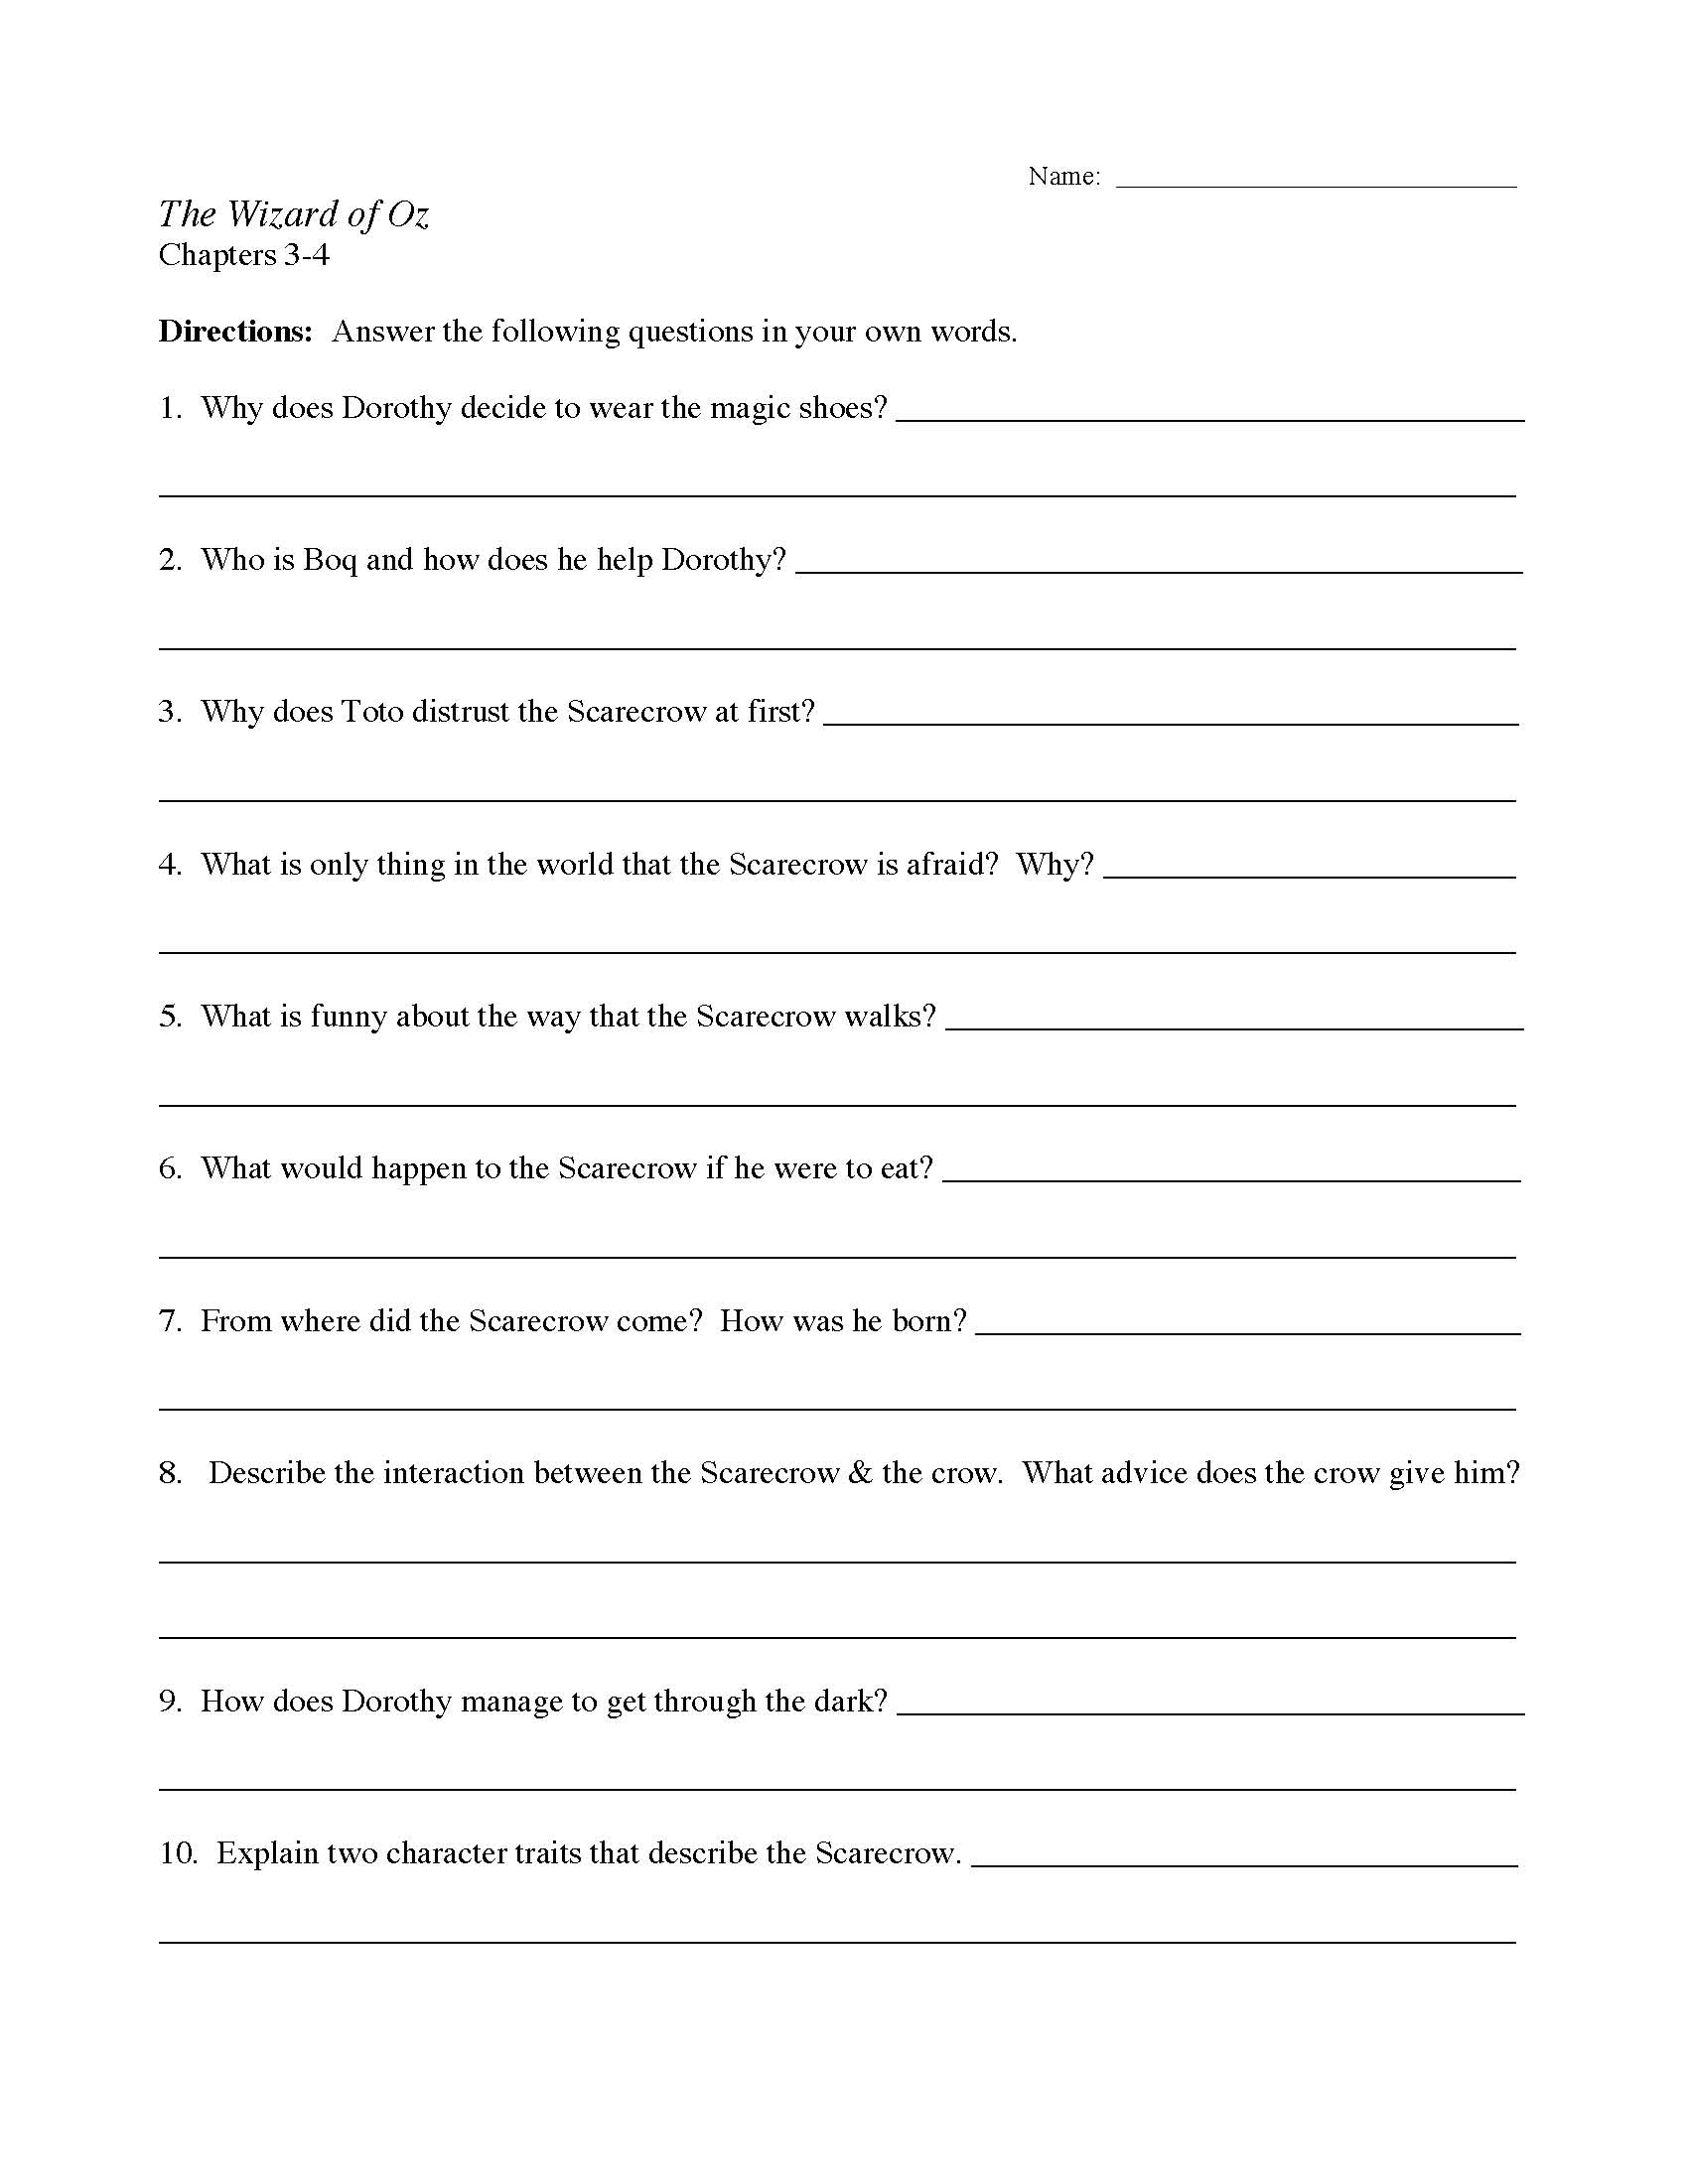 This is a preview image of the The Wizard of Oz Chapters 3-4 Worksheet.